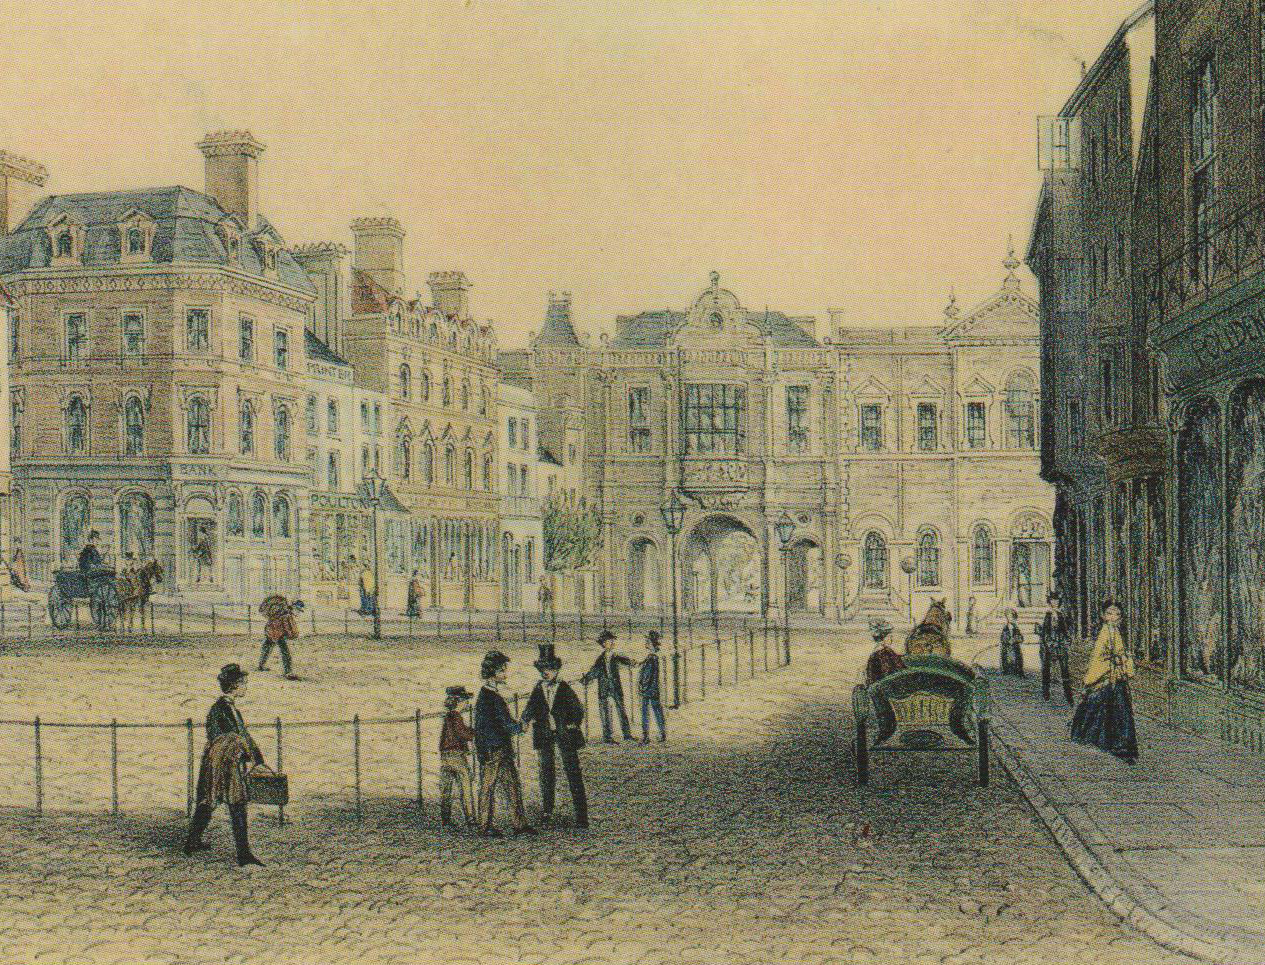 Aylesbury Market Square in the late C19